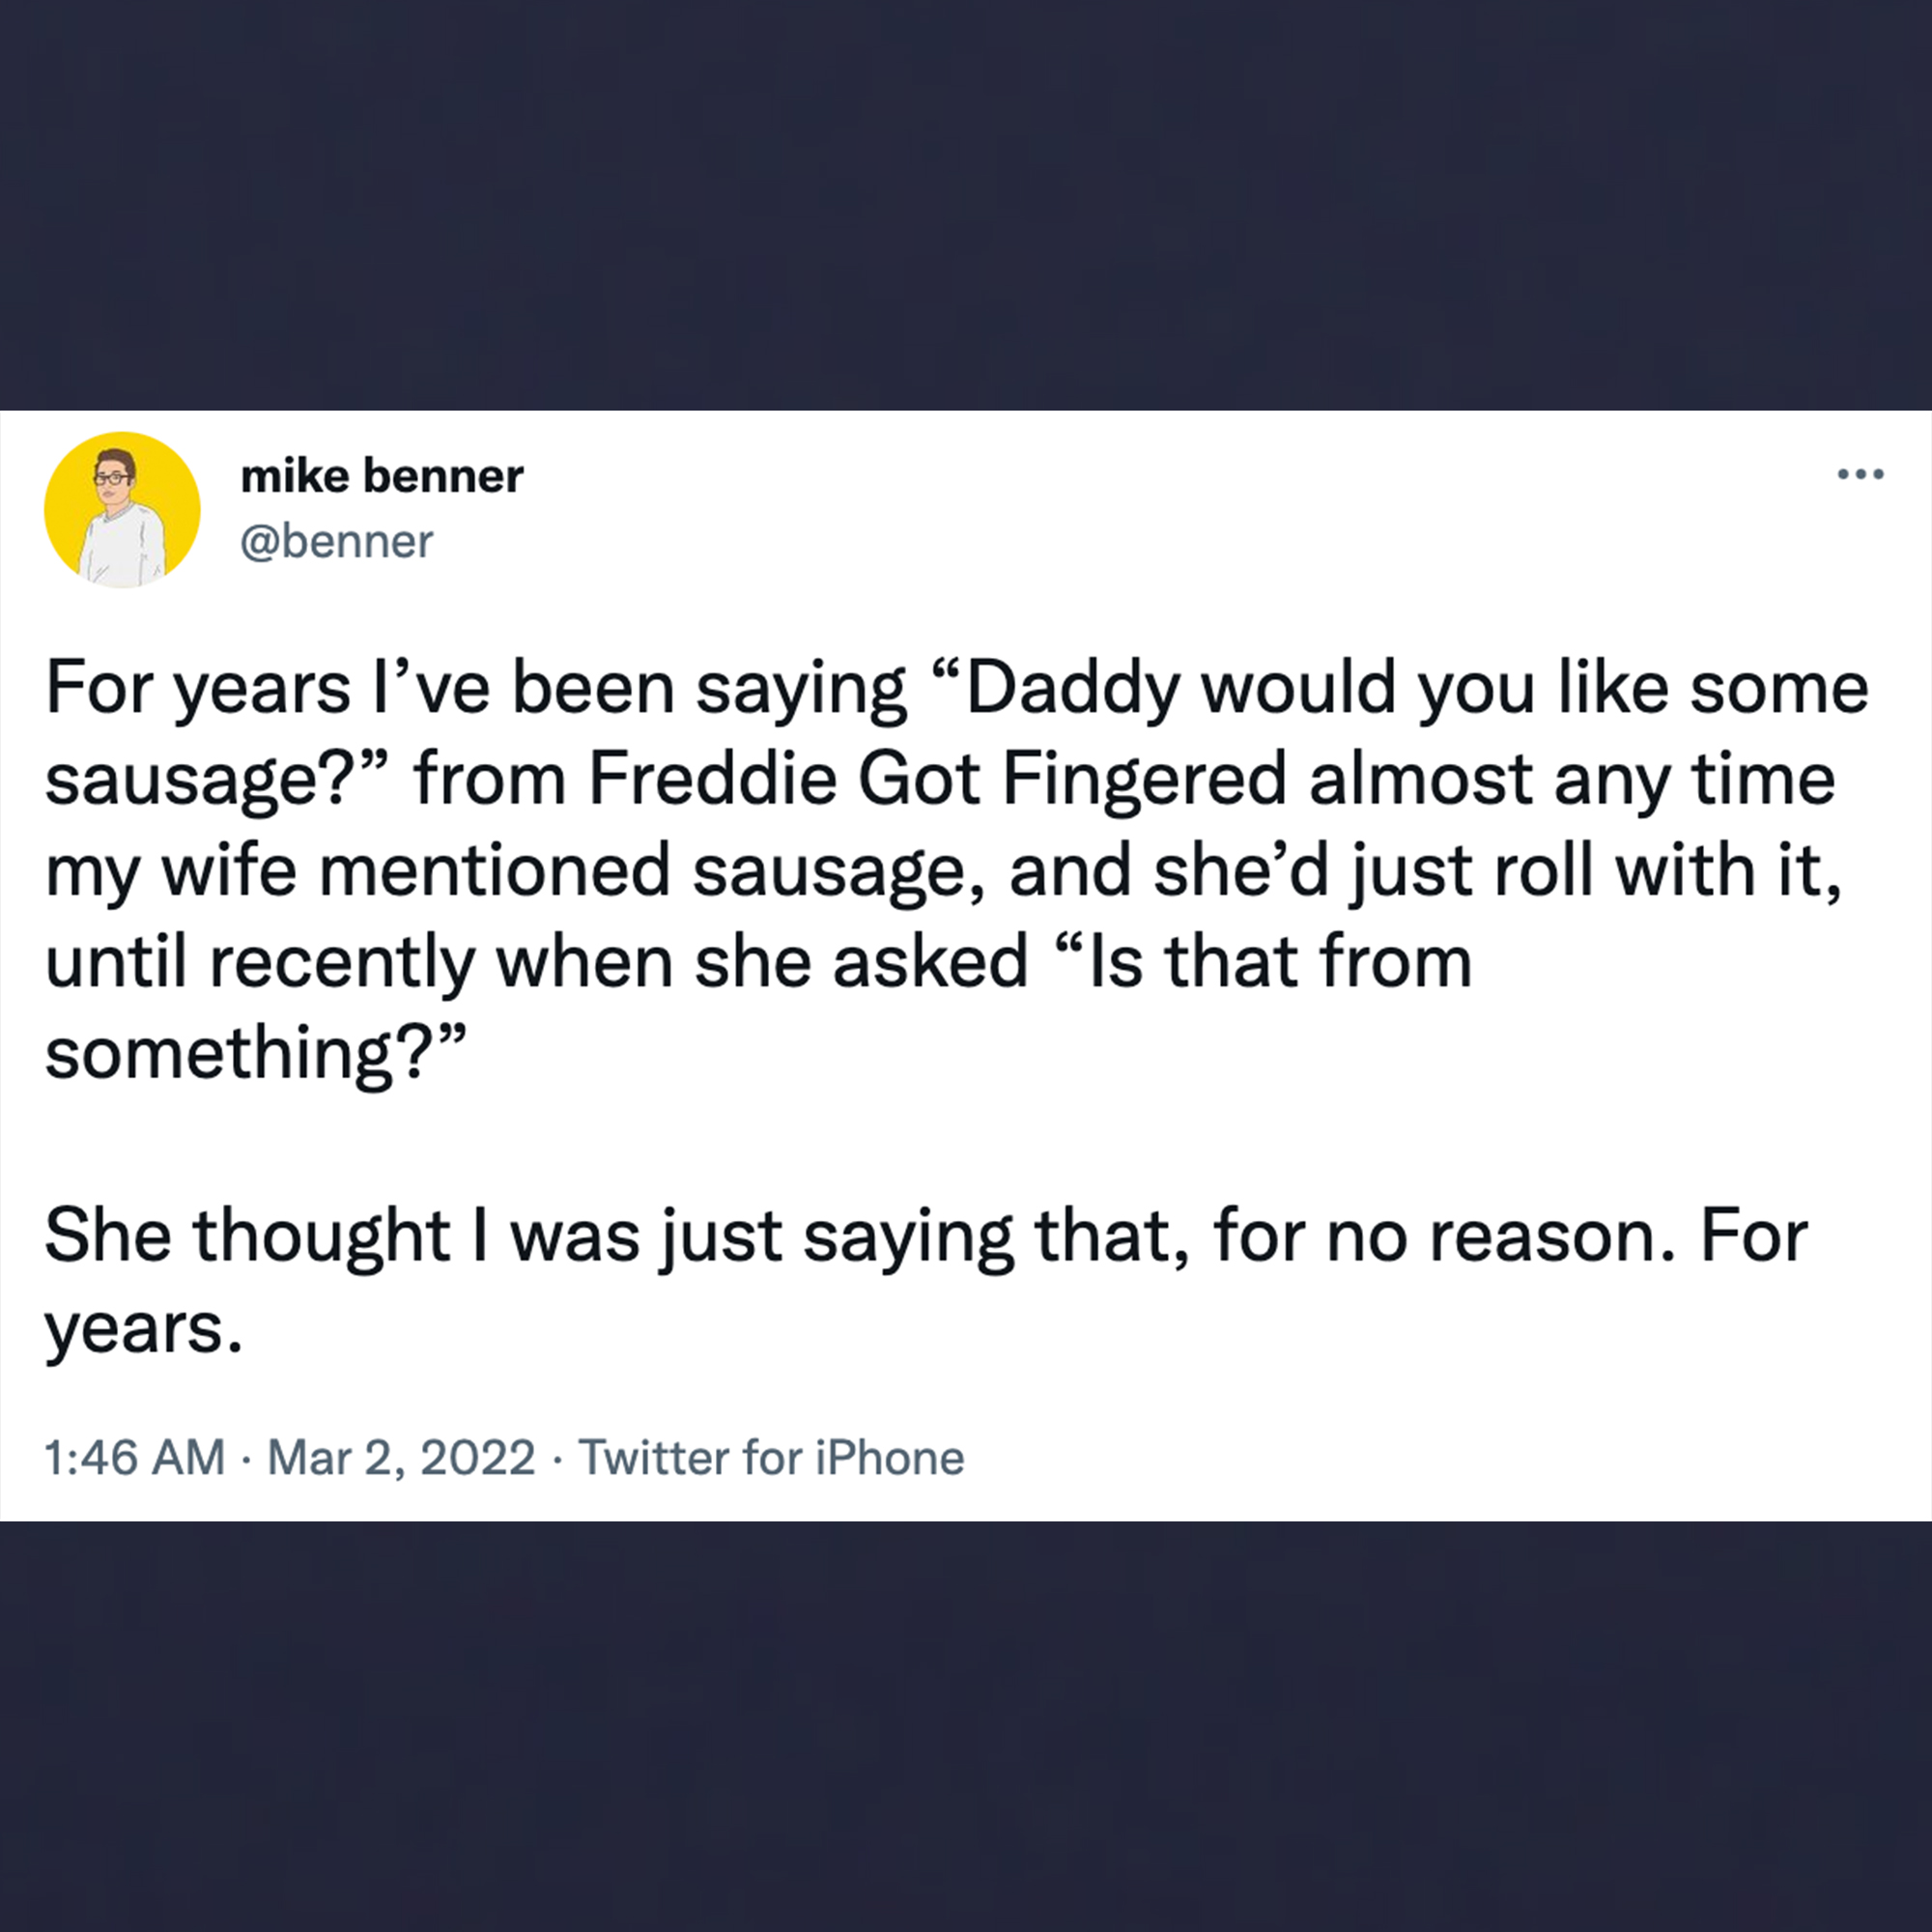 funny tweets - material - . mike benner For years I've been saying Daddy would you some sausage? from Freddie Got Fingered almost any time my wife mentioned sausage, and she'd just roll with it, until recently when she asked "Is that from something?" She 